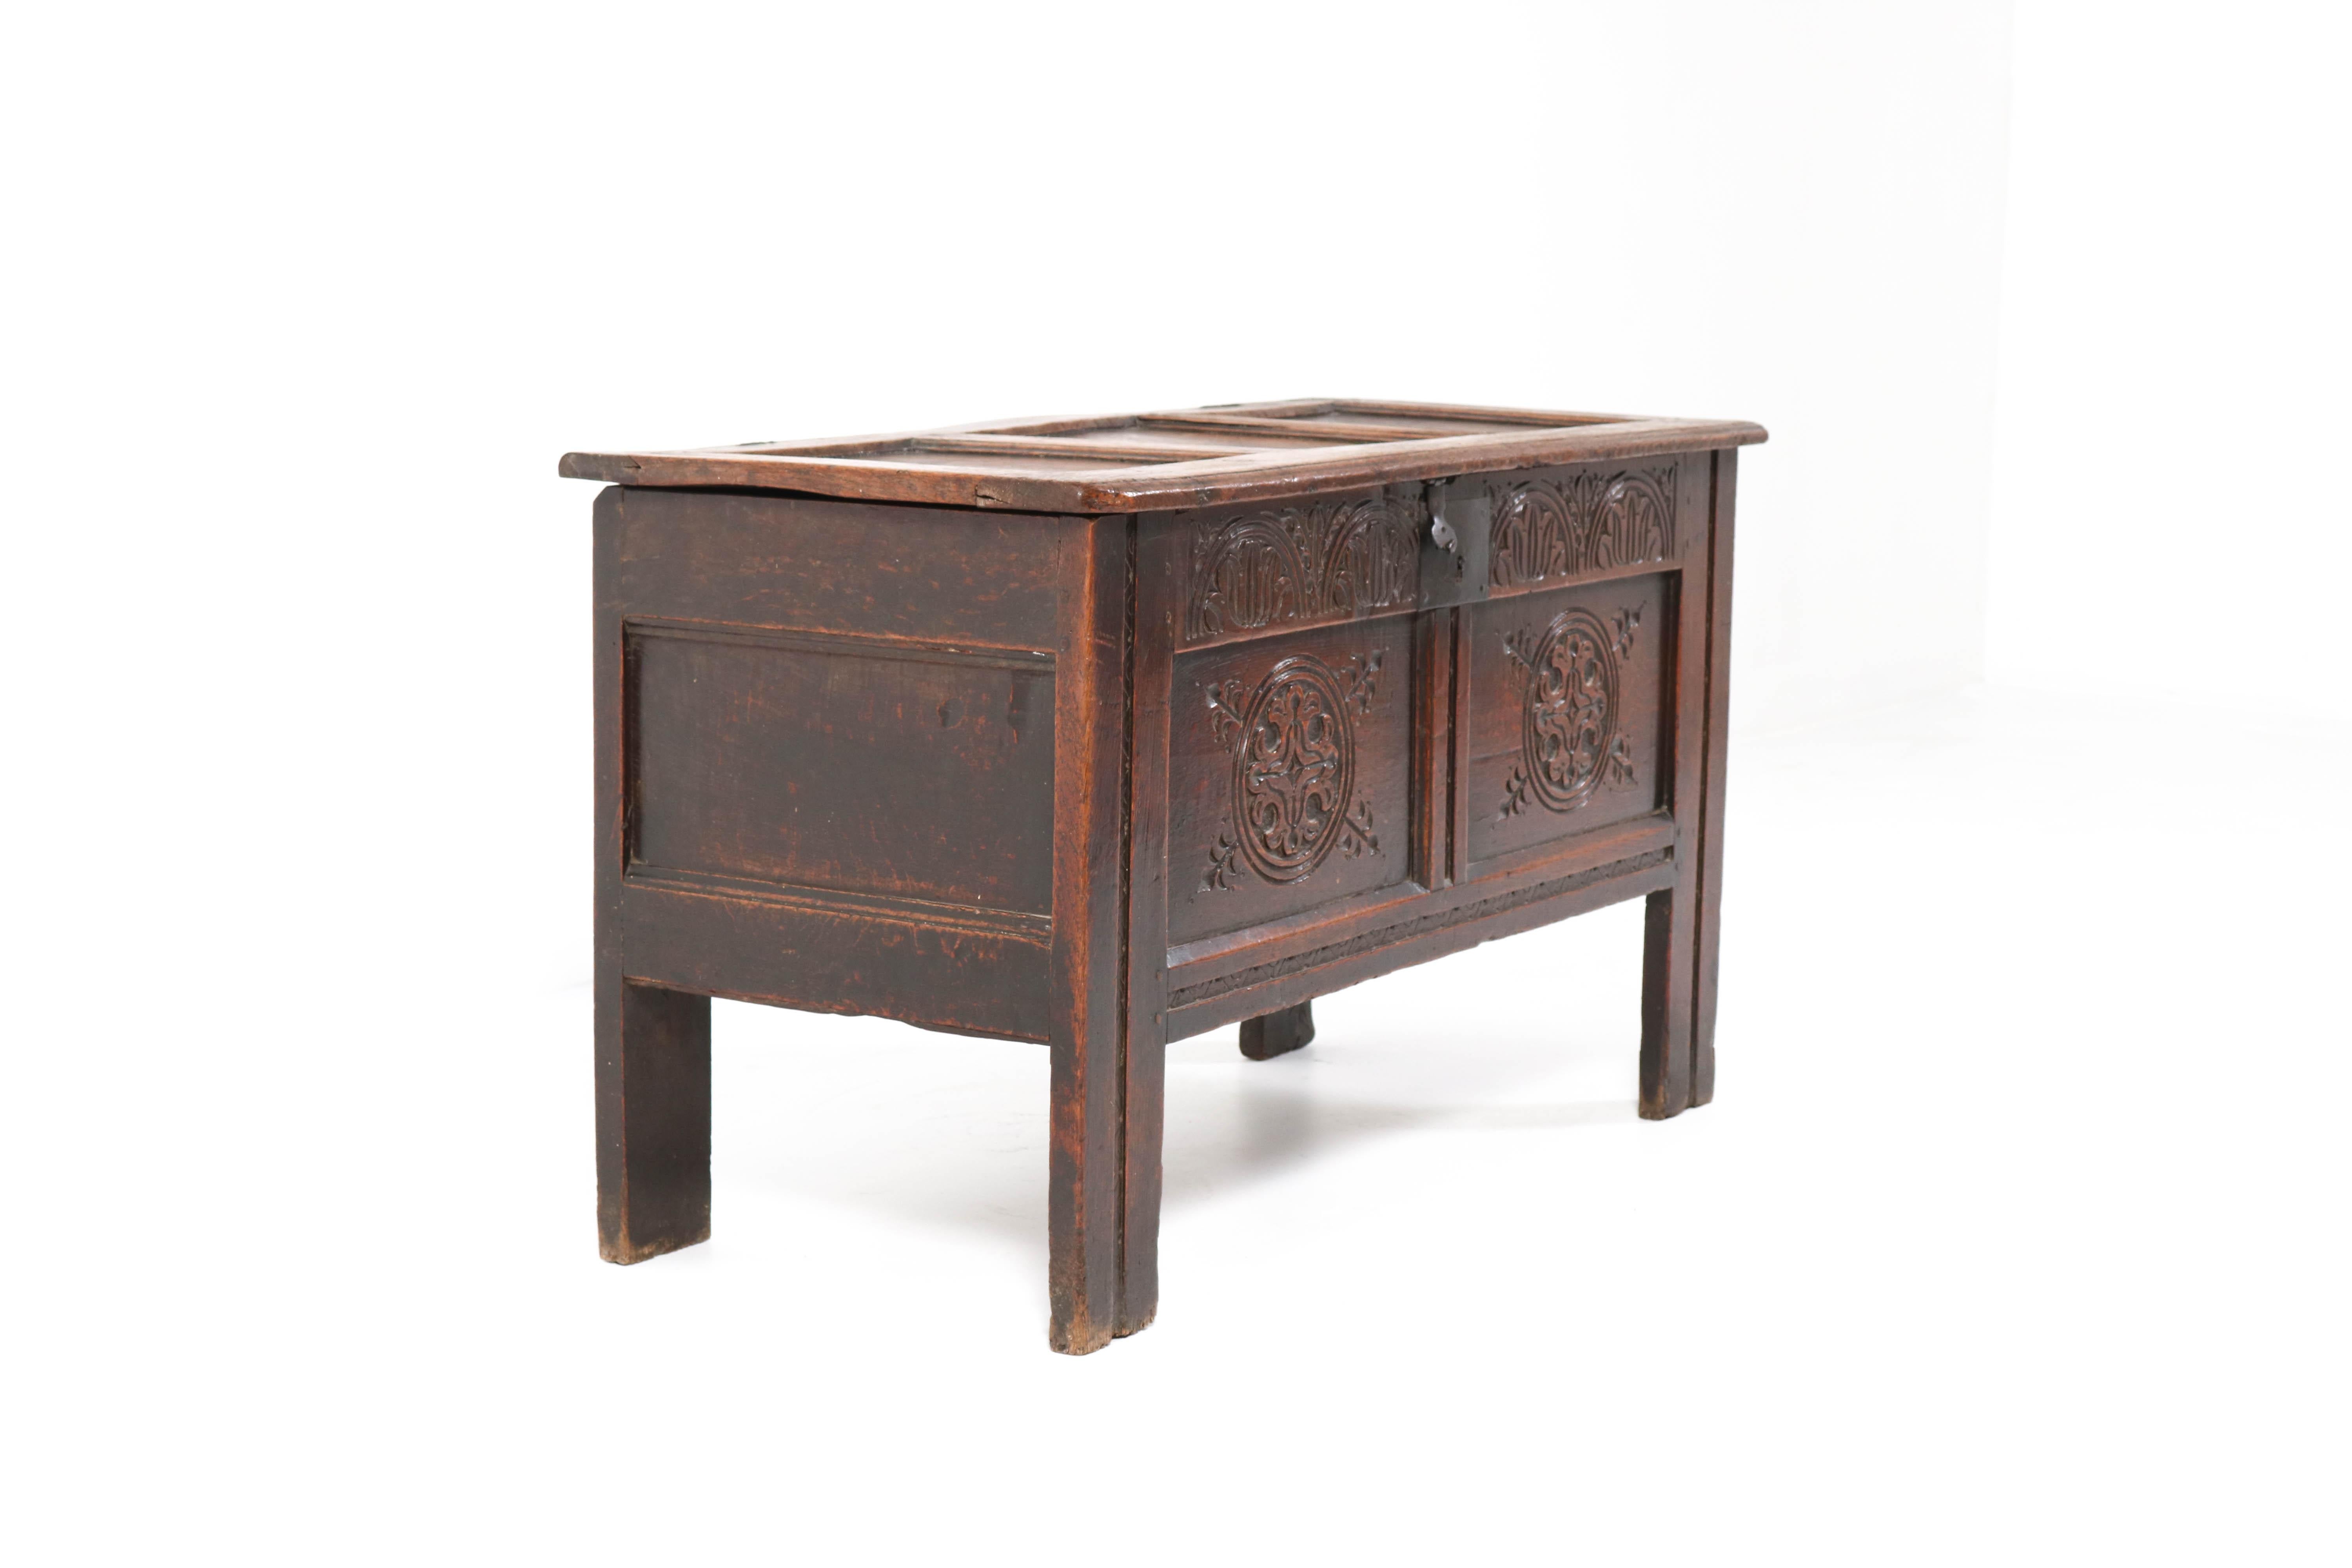 Wonderful 18th century blanket chest or coffer.
Solid carved oak with a beautiful patina.